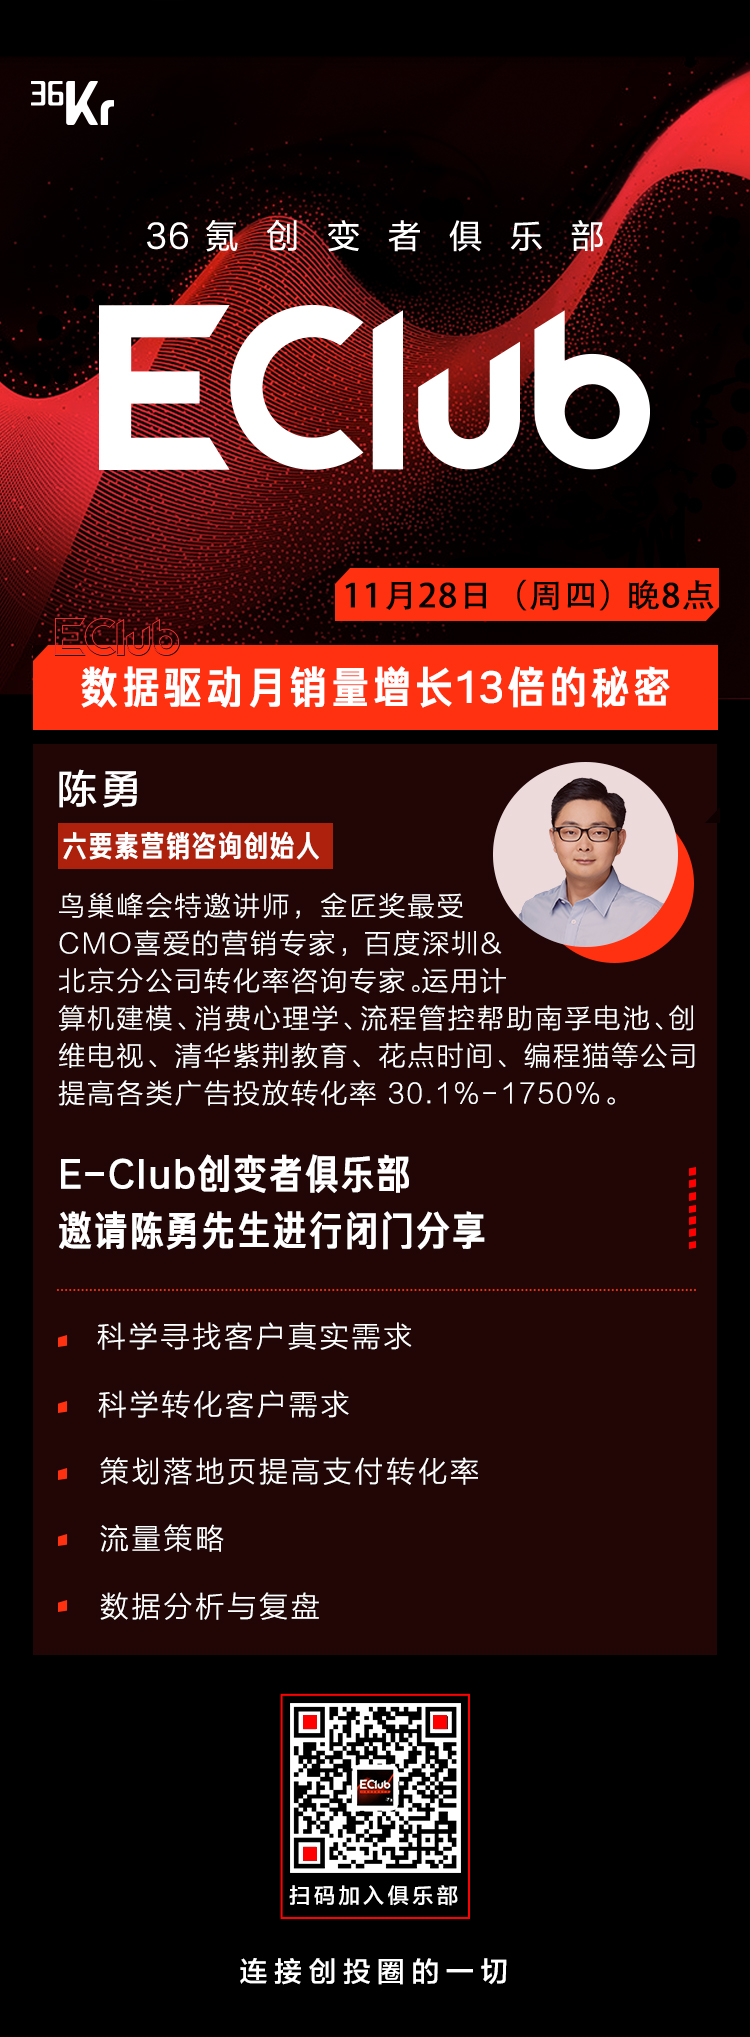 Chen Yong: The secret of data-driven monthly sales growth of 13 times | E-Club Makeover Club closed door sharing